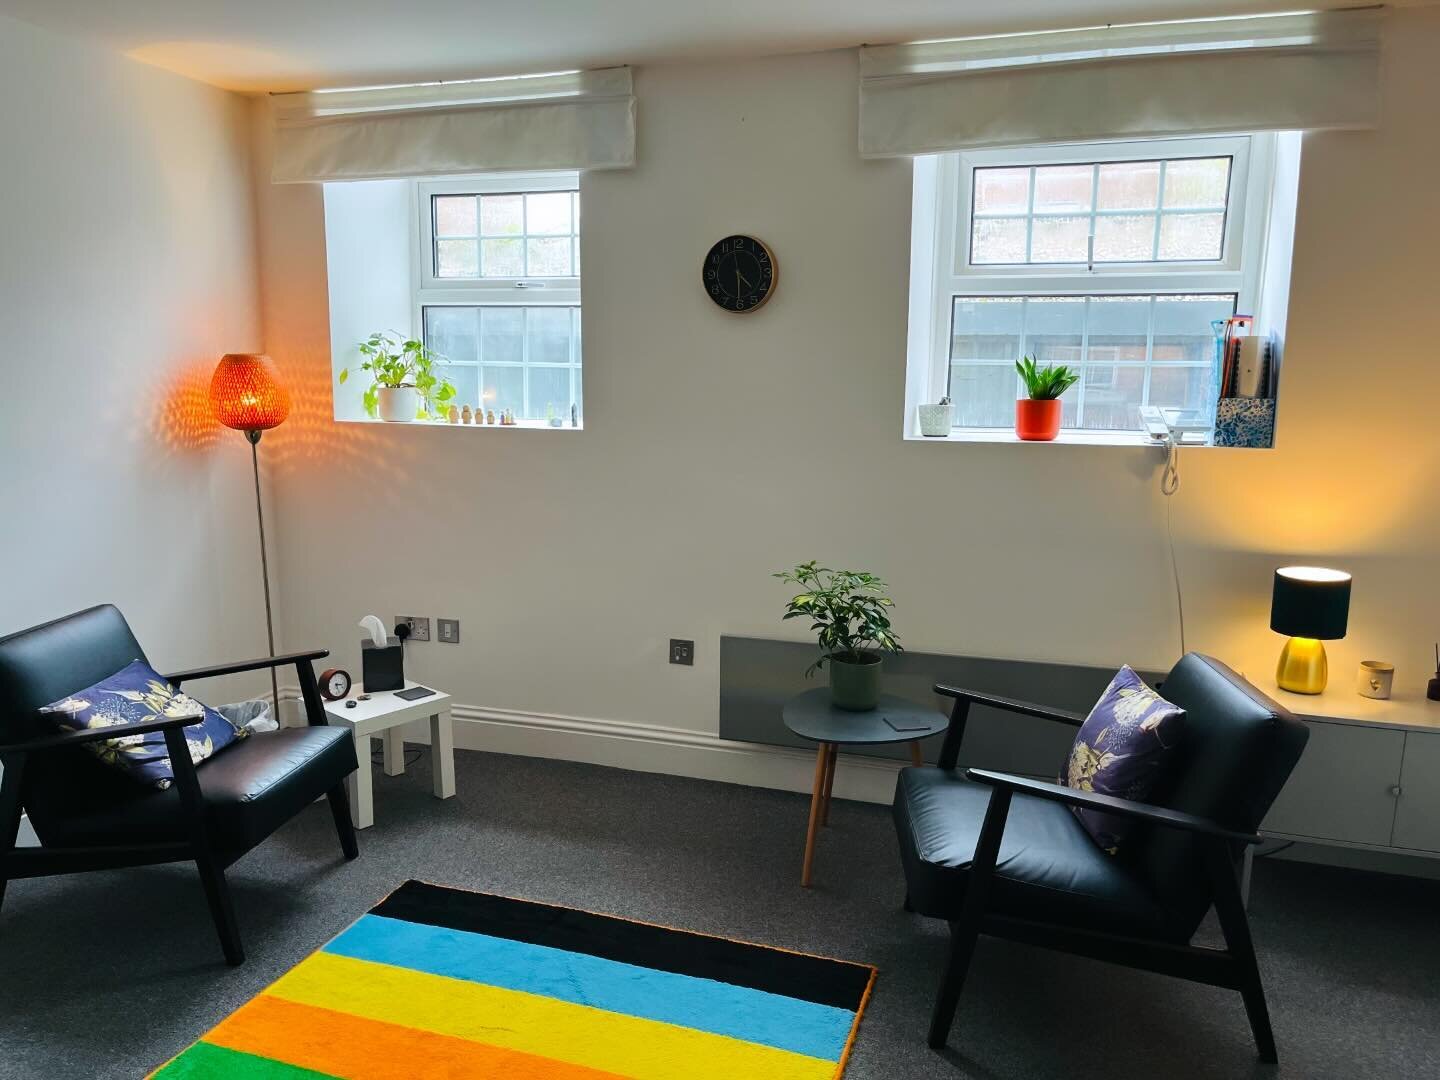 We are delighted to have all our rooms now on the same floor! This means that you can access us even easier! Circle is growing and we love that you are growing with us. ❤️ #counsellor #counselling #tring #berkhamsted #aylesbury #hertfordshire #buckin